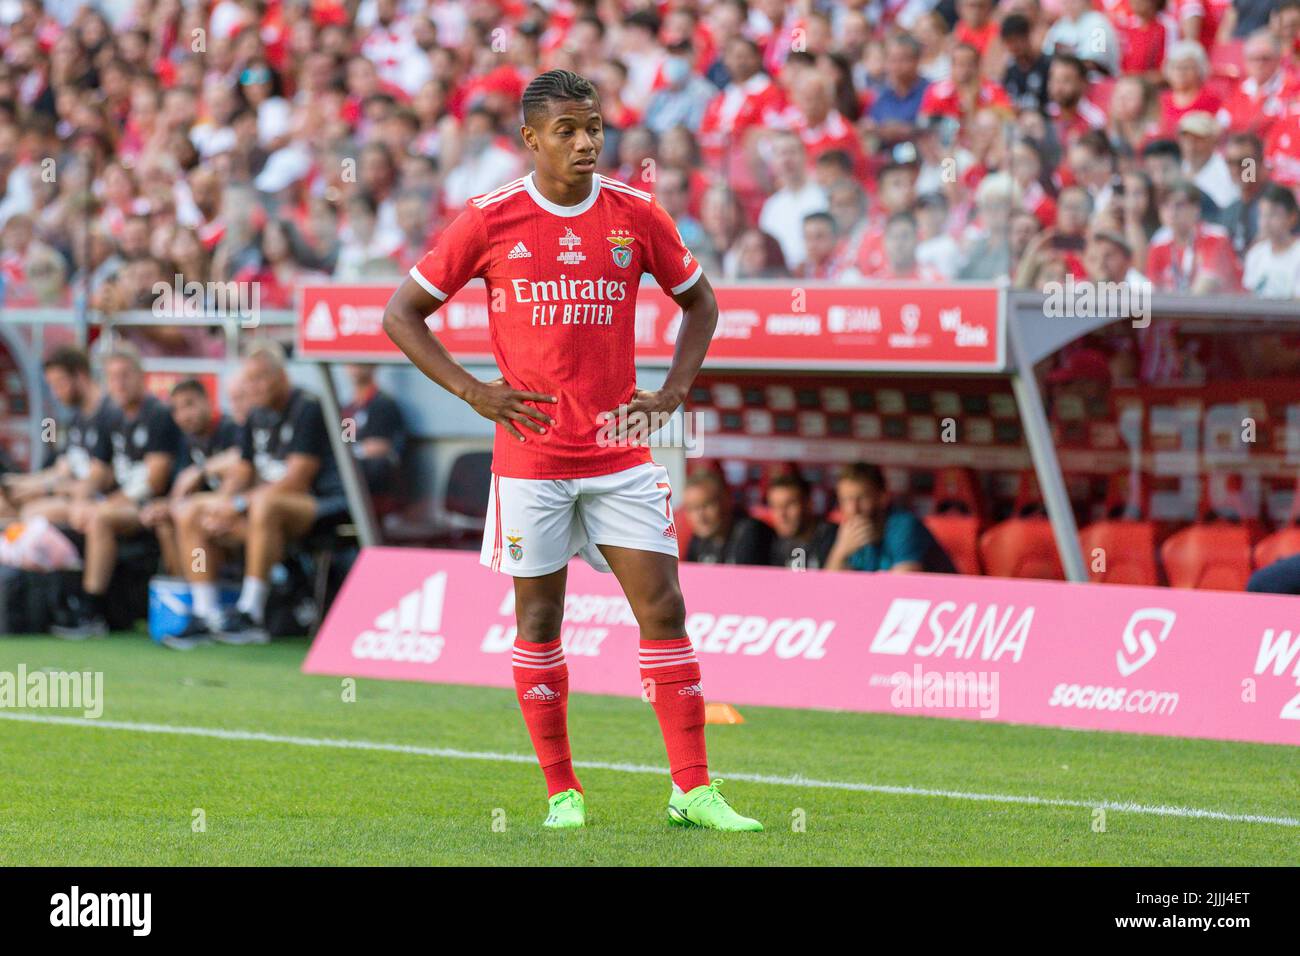 Lisbon, Portugal. July 26, 2022.  Benfica's forward from Brazil David Neres (7) in action during the friendly game between SL Benfica vs Newcastle United FC Credit: Alexandre de Sousa/Alamy Live News Stock Photo